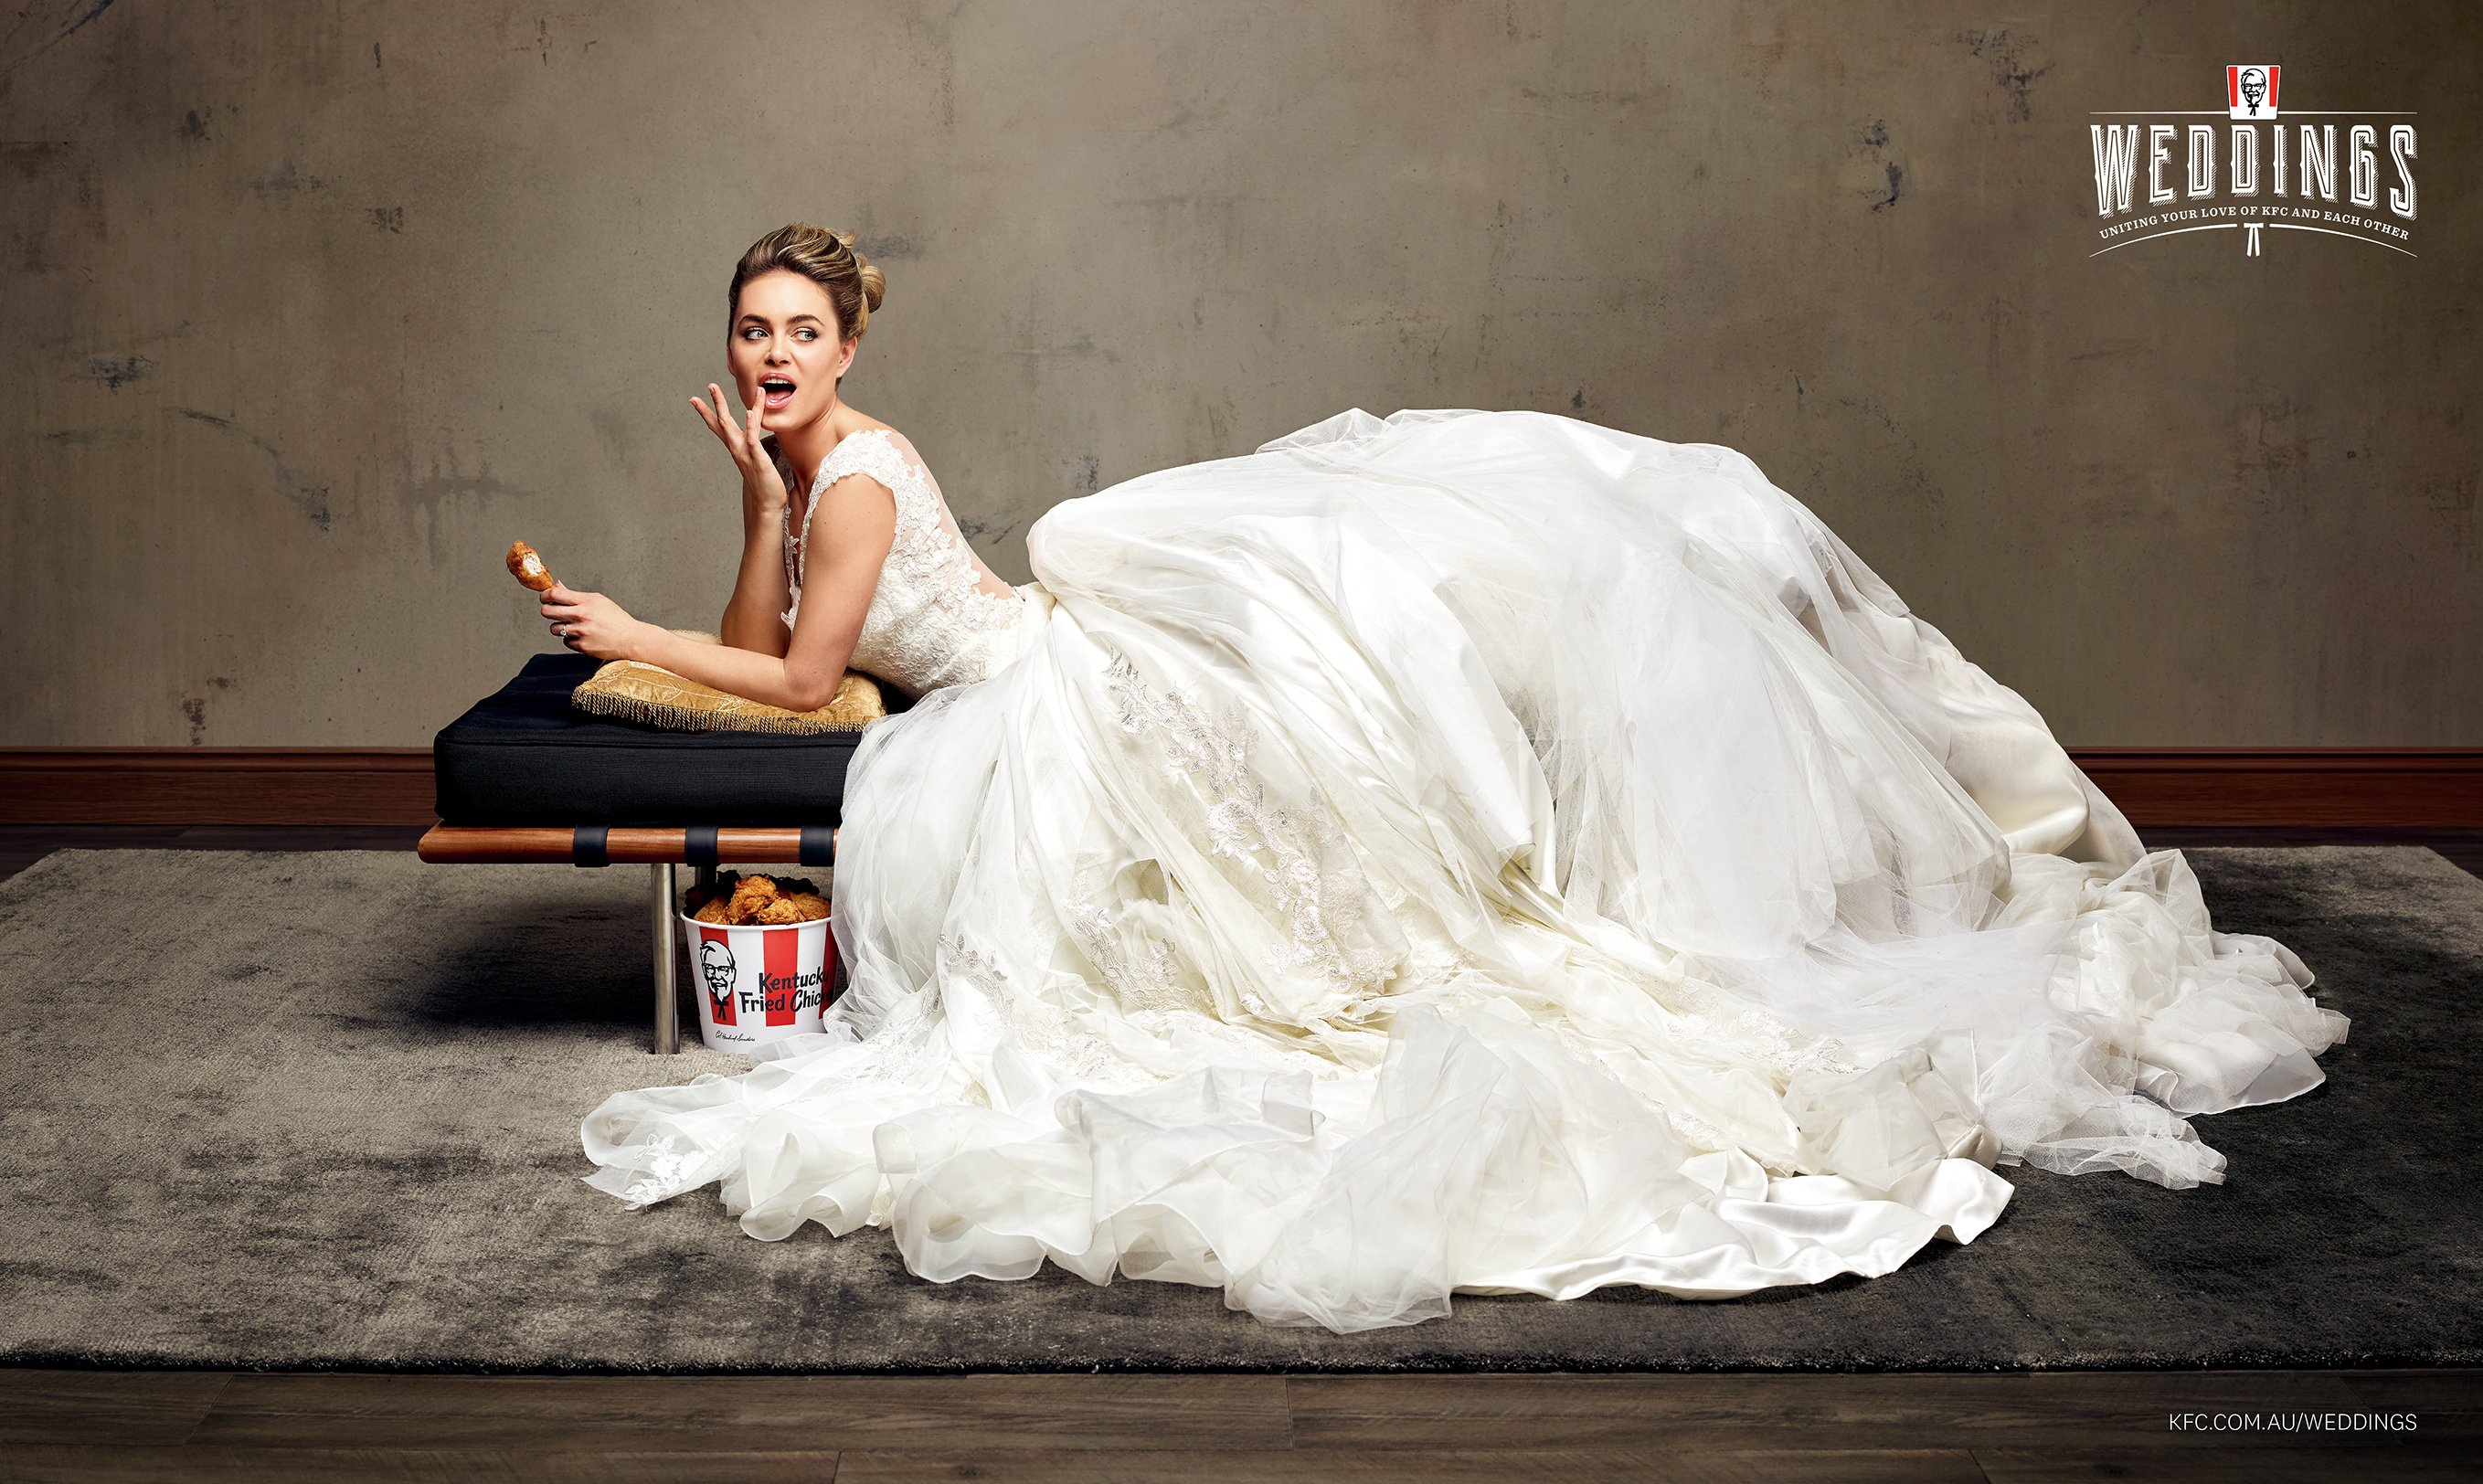 KFC Encourages Aussies to ‘Put a Wing On It’ With KFC Wedding Service Launch